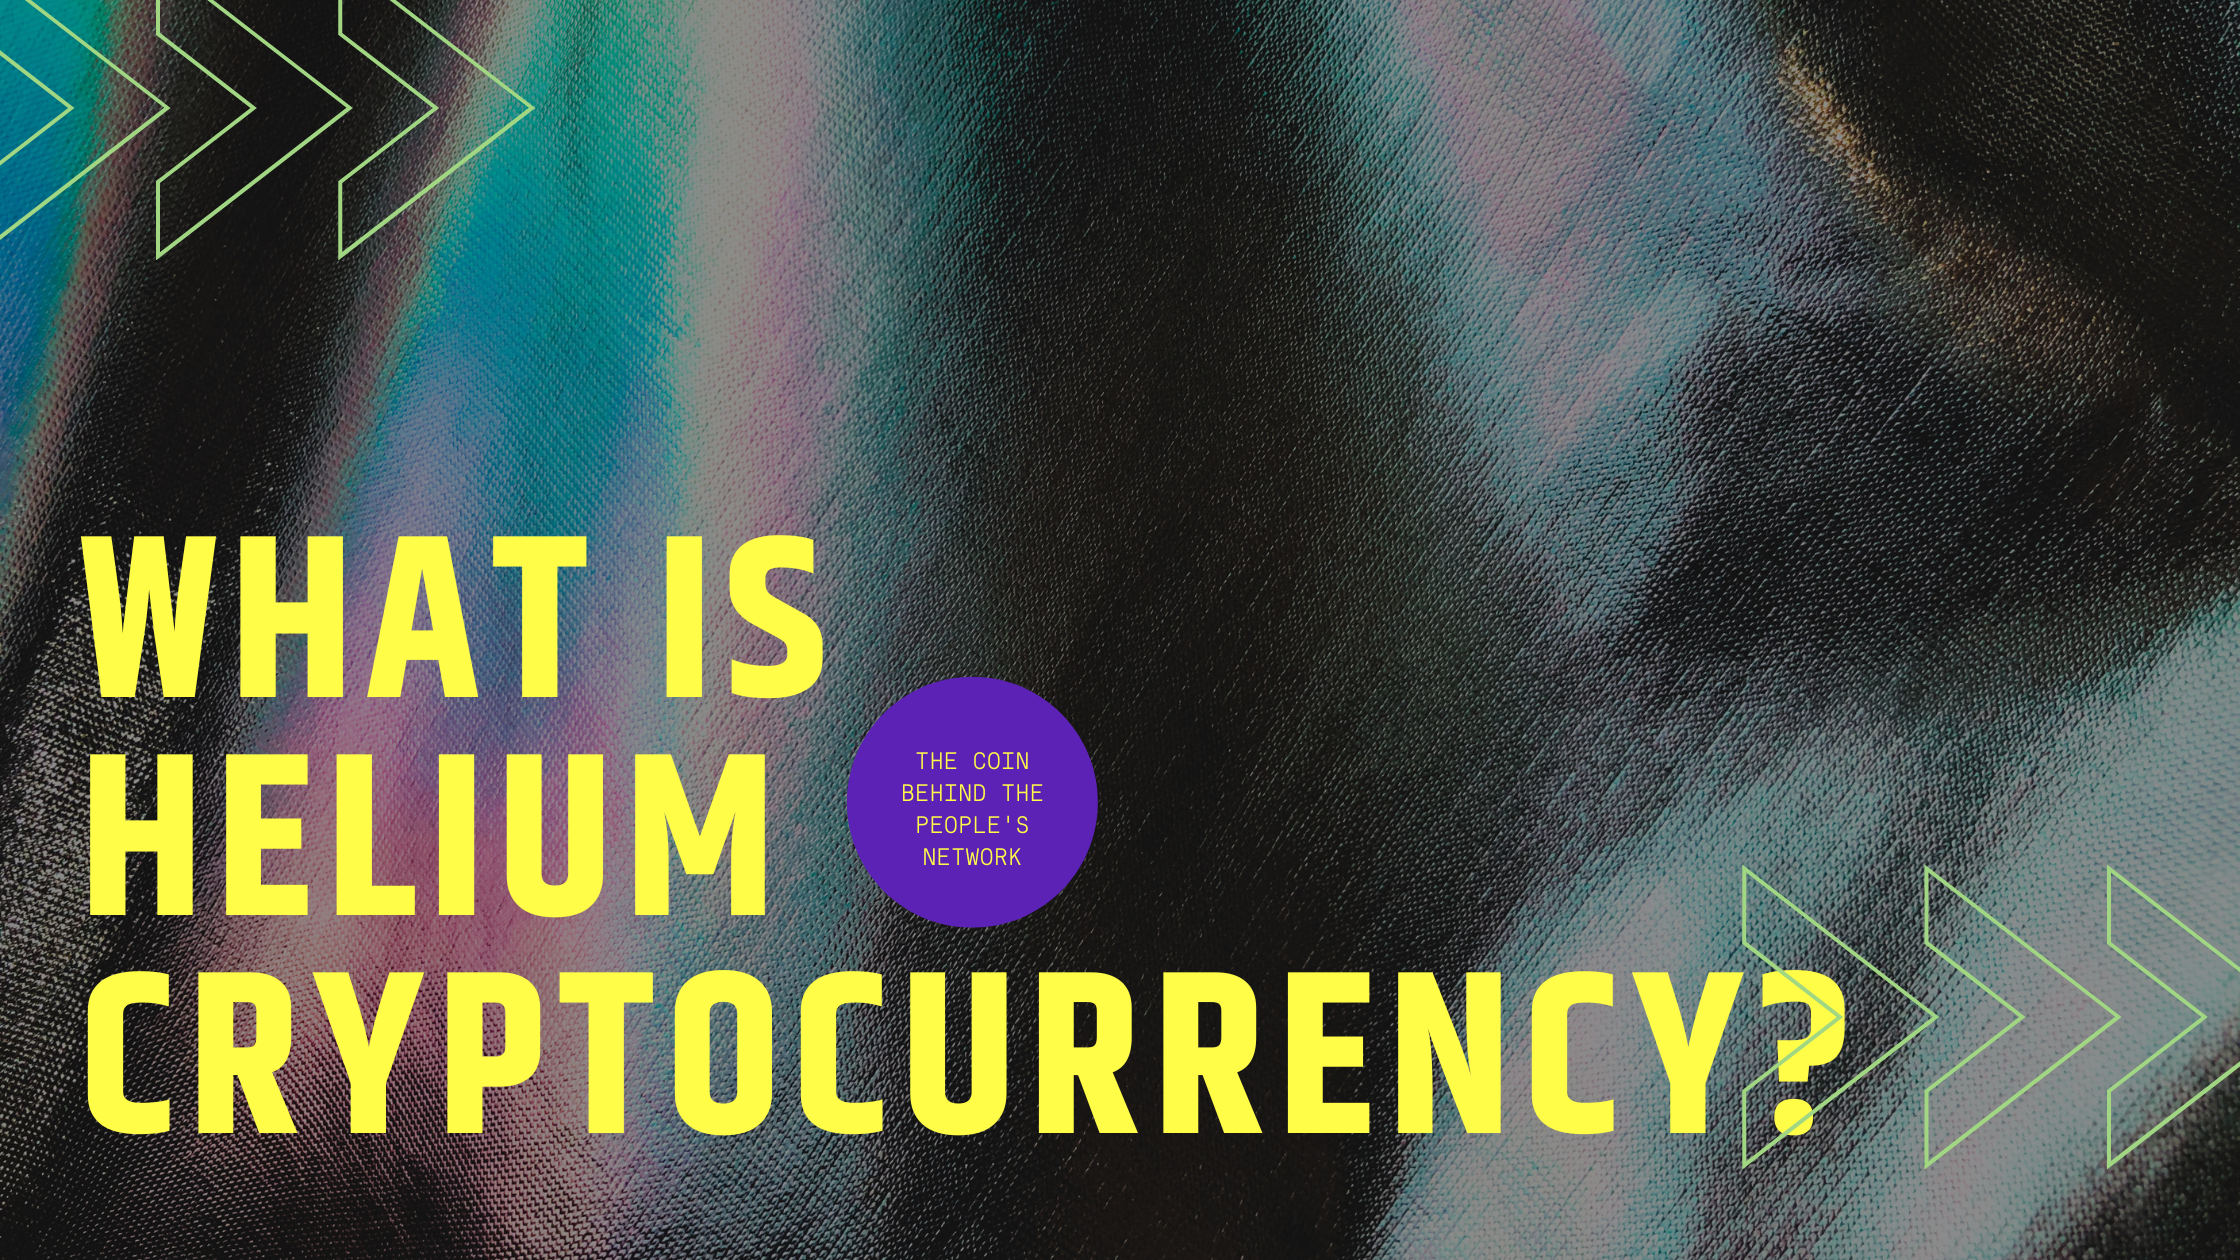 What is Helium Cryptocurrency?